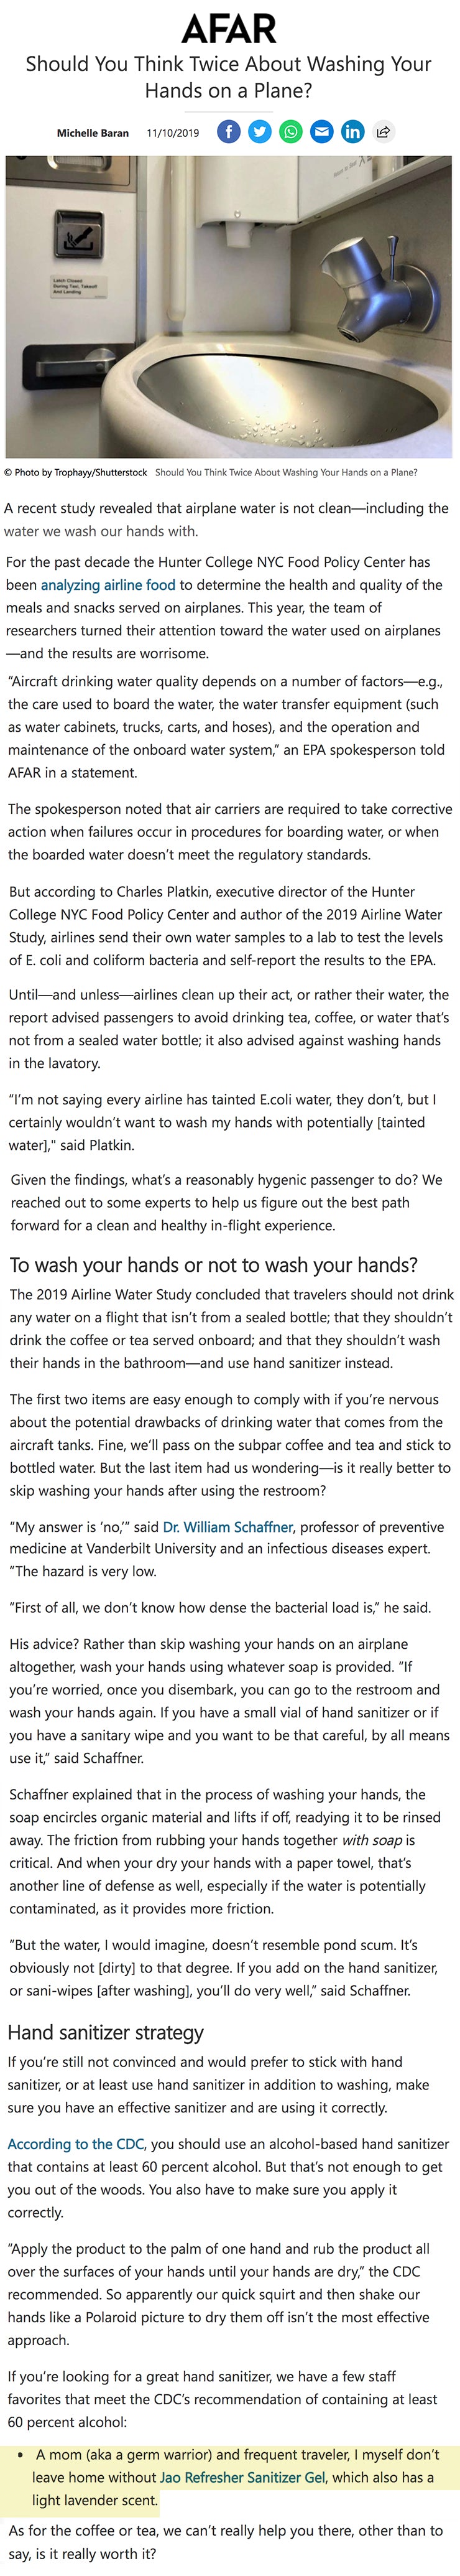 Afar: Wash your hands on a plane? Use Jao Sanitizer